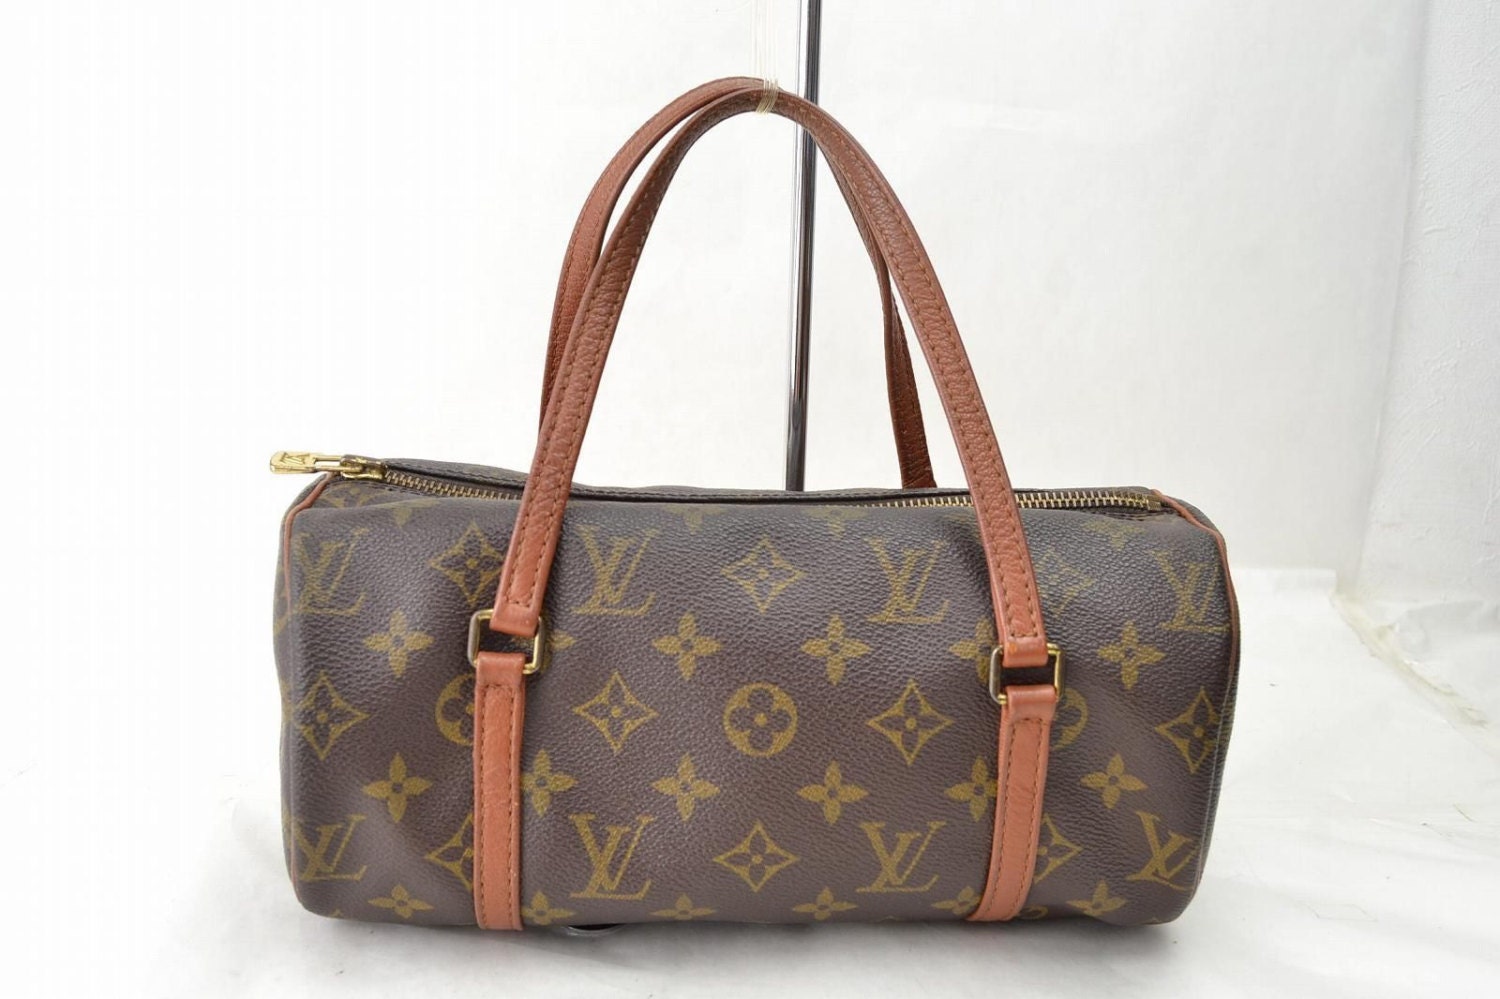 How To Buy Authentic Louis Vuitton Bags From Japan On eBay